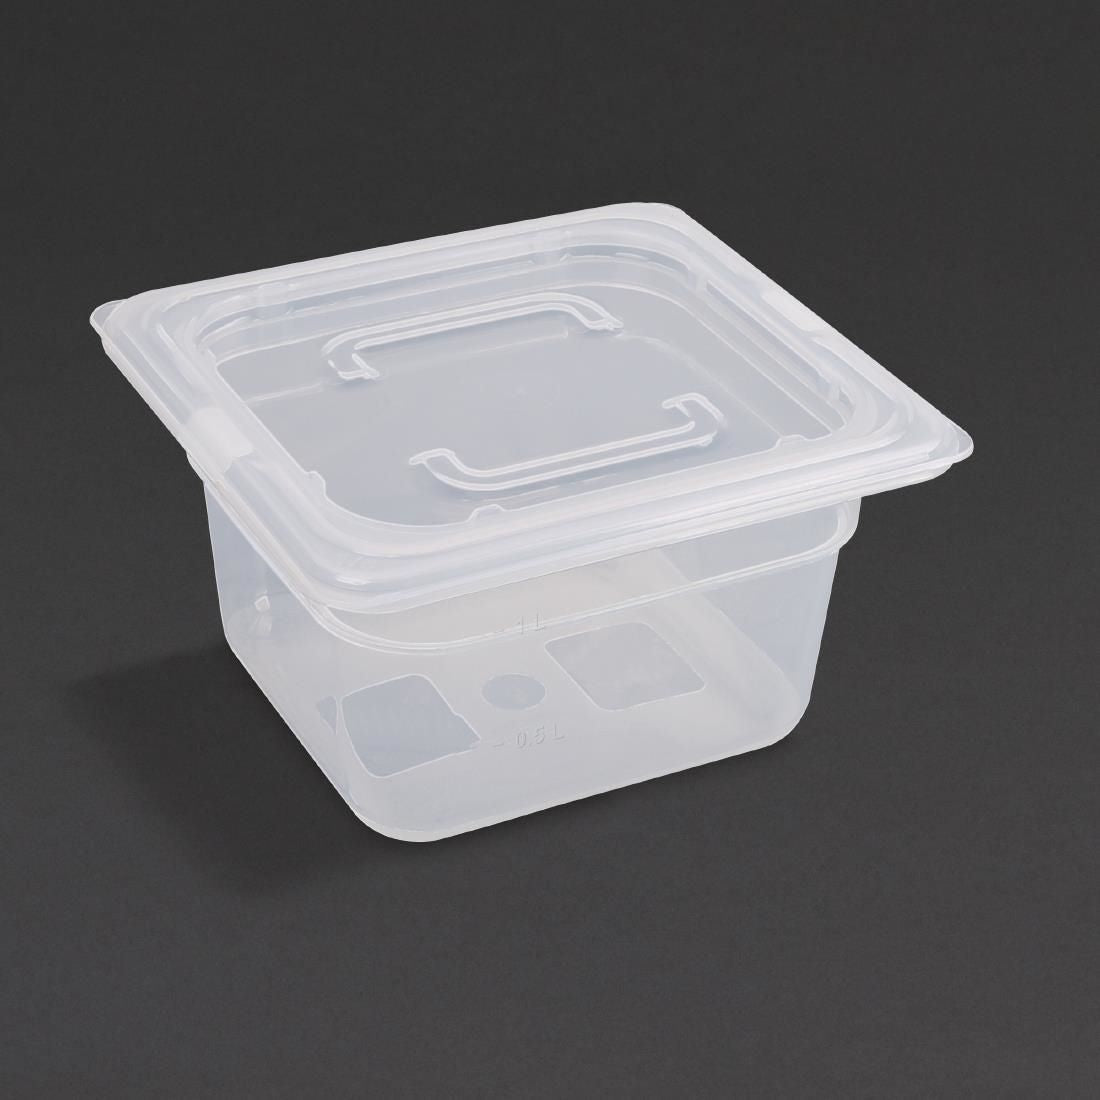 GJ526 Vogue Polypropylene 1/6 Gastronorm Container with Lid 100mm (Pack of 4) JD Catering Equipment Solutions Ltd